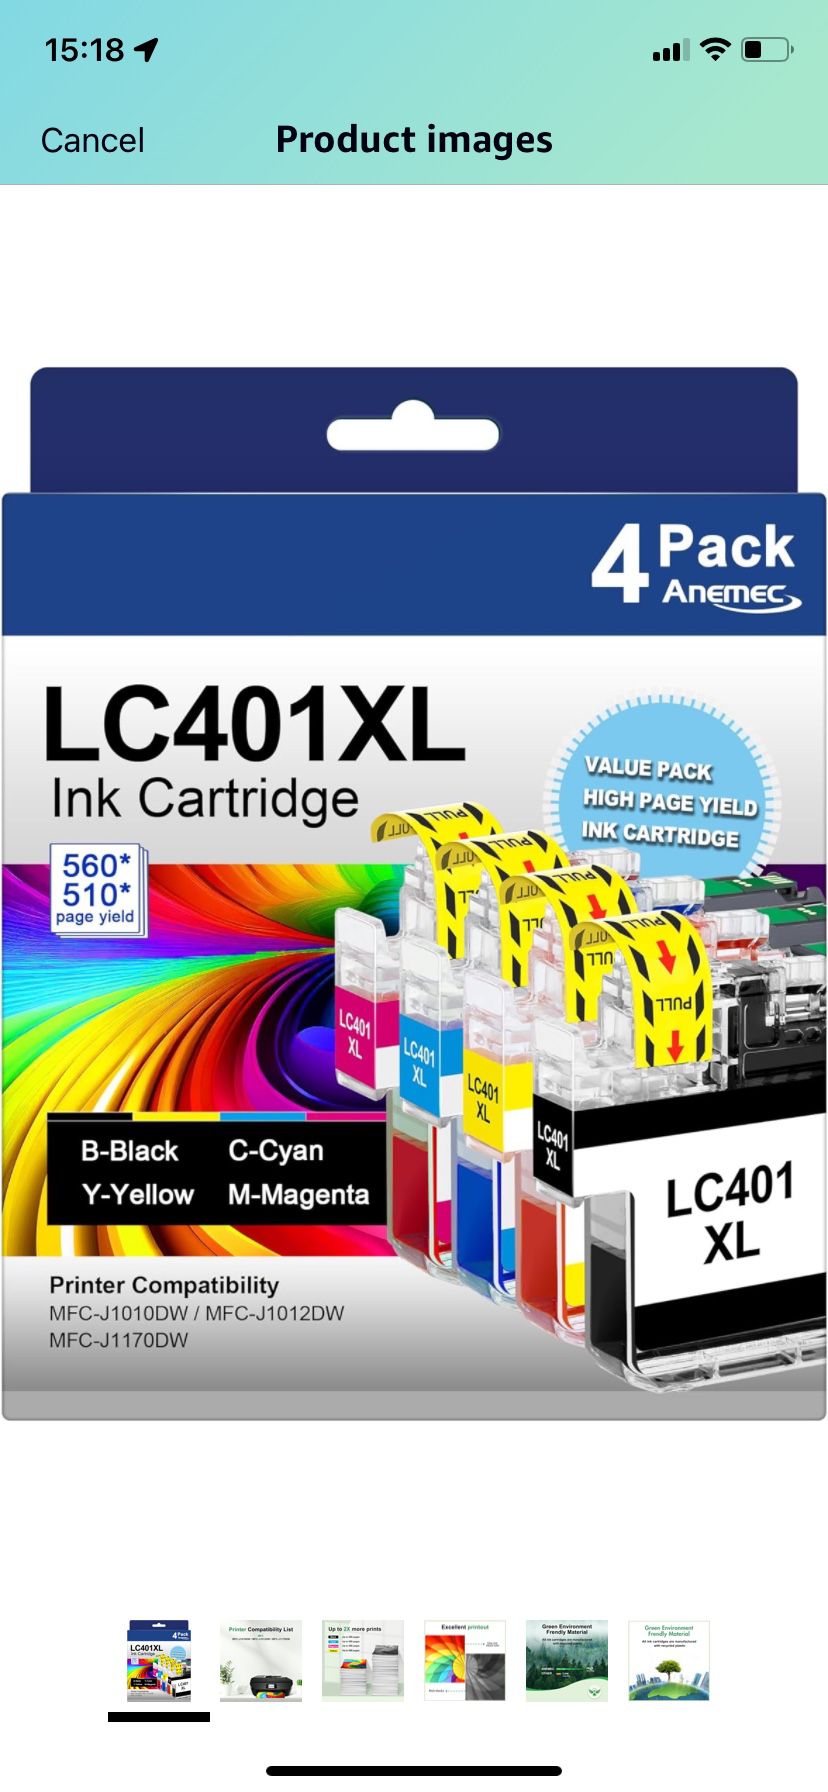 LC401XL LC401 XL Compatible Ink Cartridges Replacement for Brother LC 401 XL 401XL Work with Brother MFC-J1010DW MFC-J1012DW MFC-J1170DW Printer (4 XL